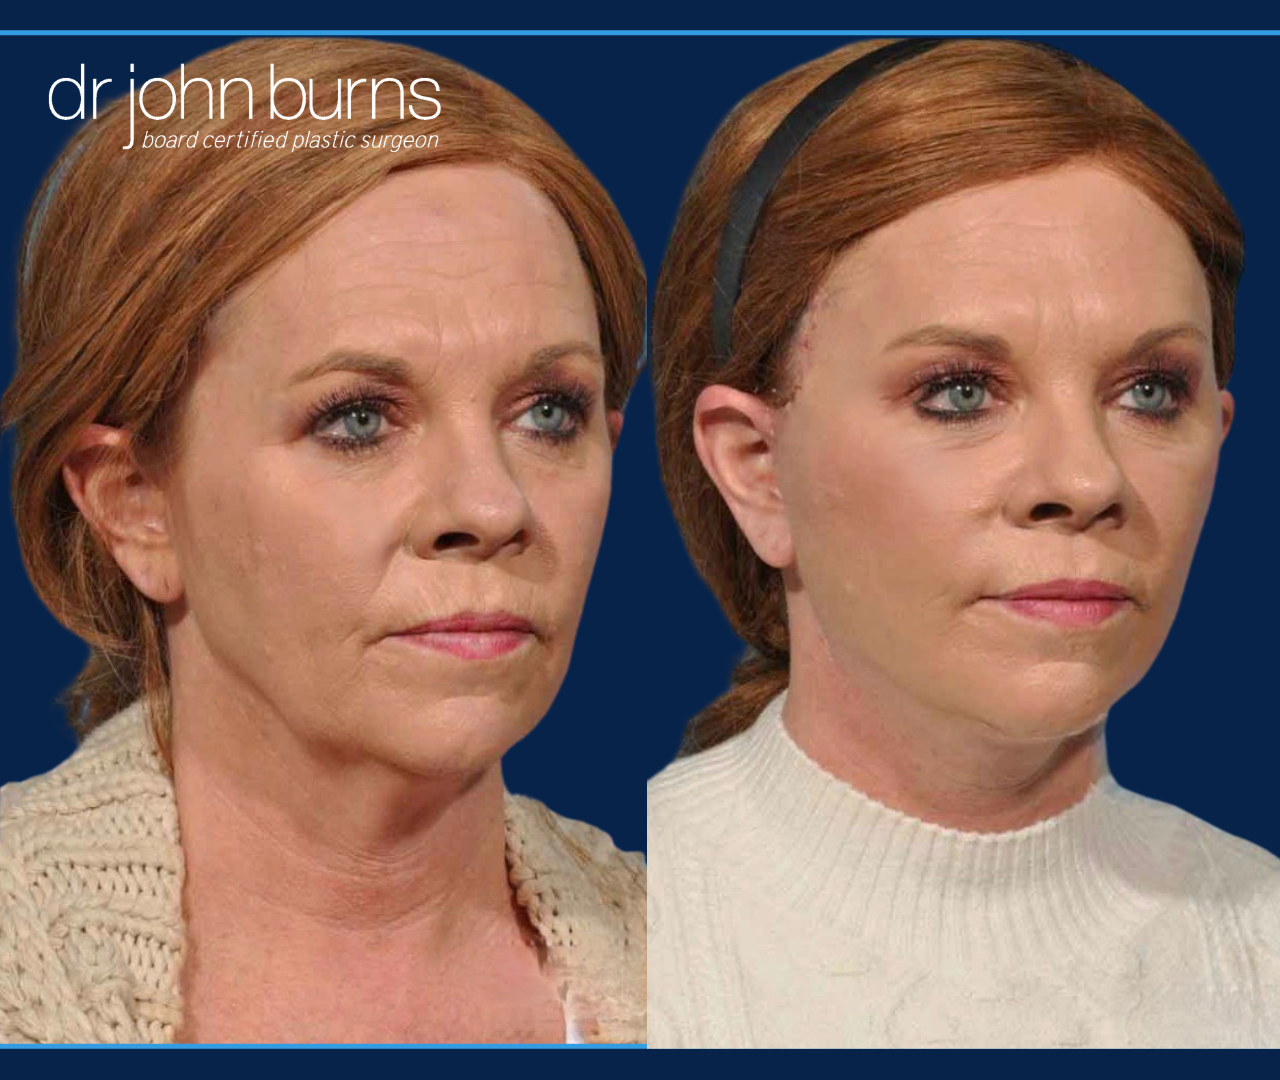 Before & After Facelift and neck lift by Dallas Facelift specialist Dr. John Burns, FACS